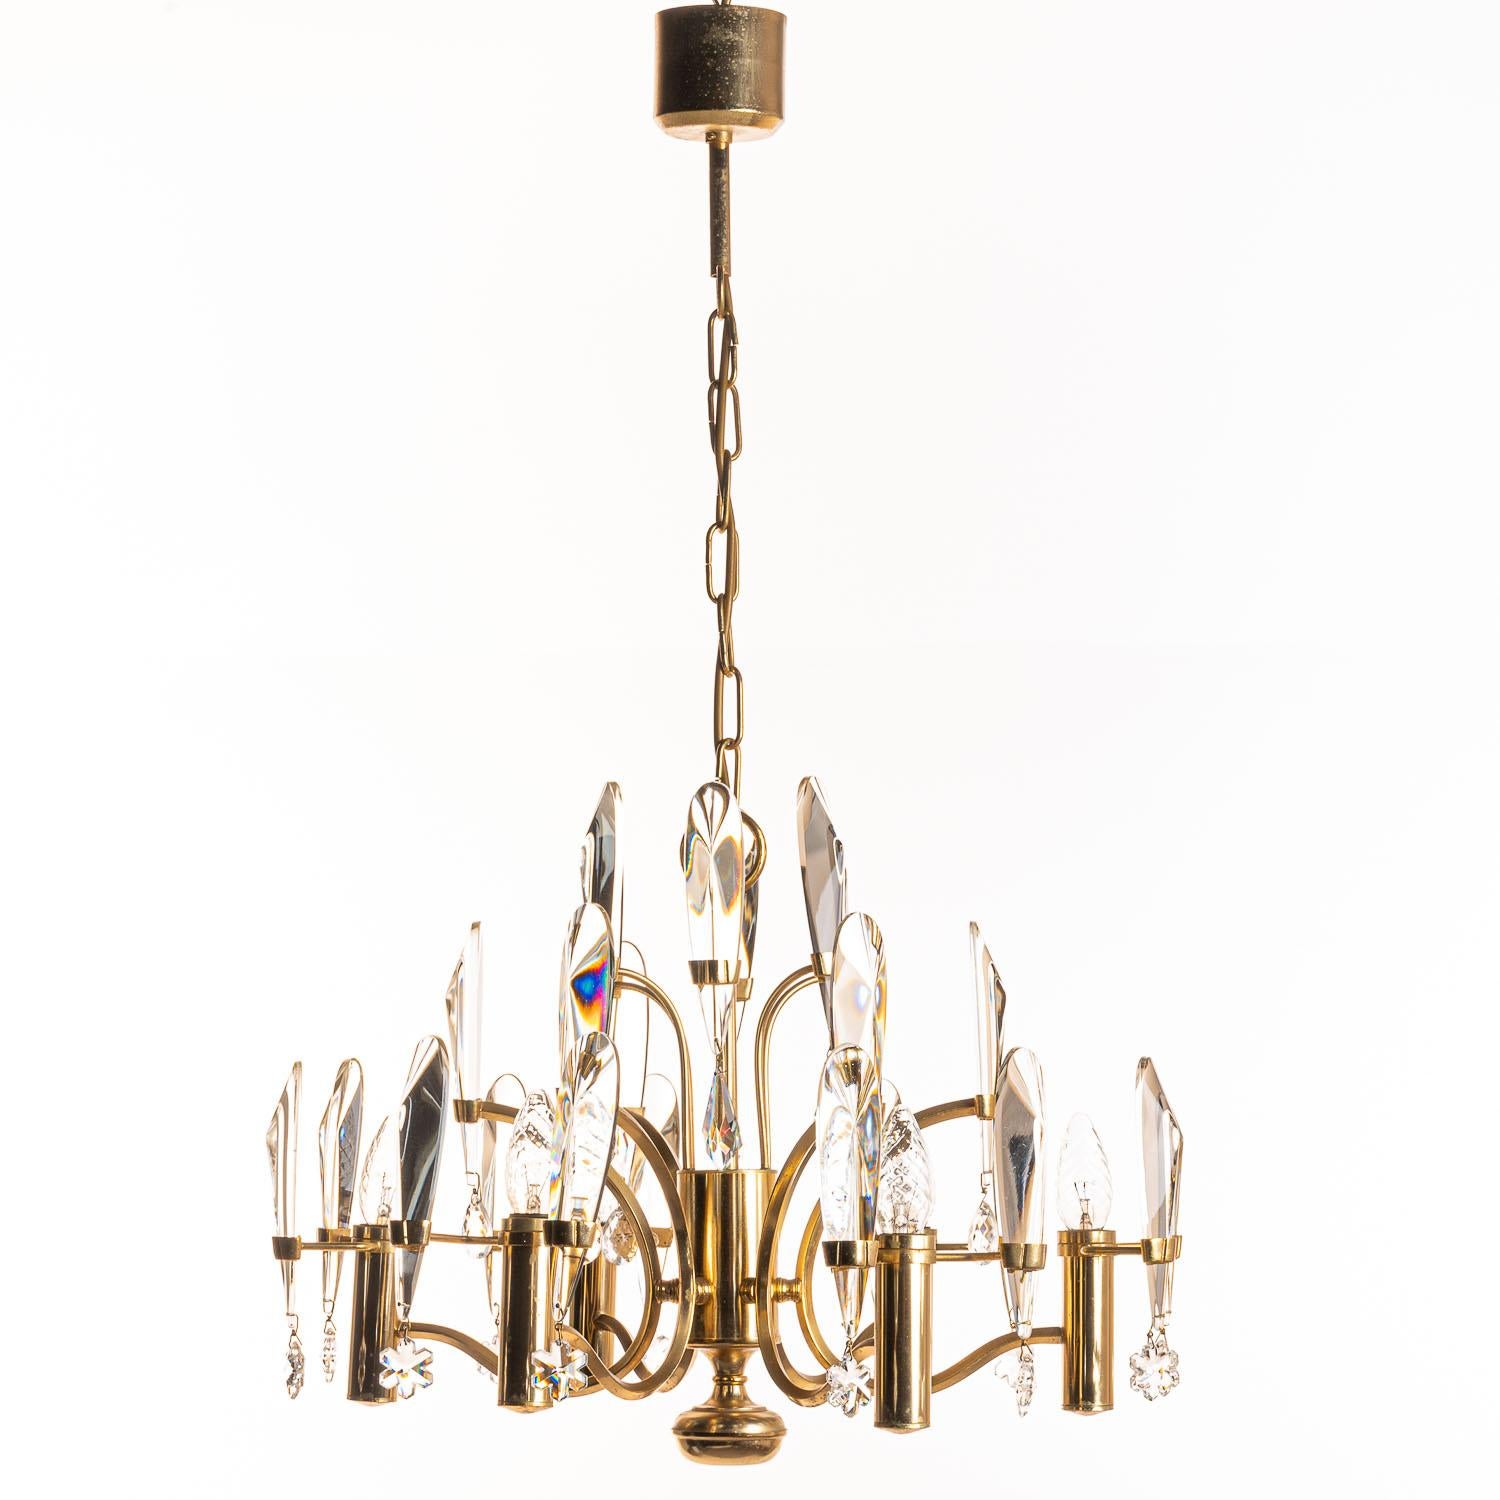 Glamorous lamp by Gaetano Sciolari. His signature design of in total 24 beveled edged crystal glass hanging from a gold-plated brass mount. Under each crystal glass bar is a classic crystal glass ornament. It holds six E14 lightbulbs
Please note,